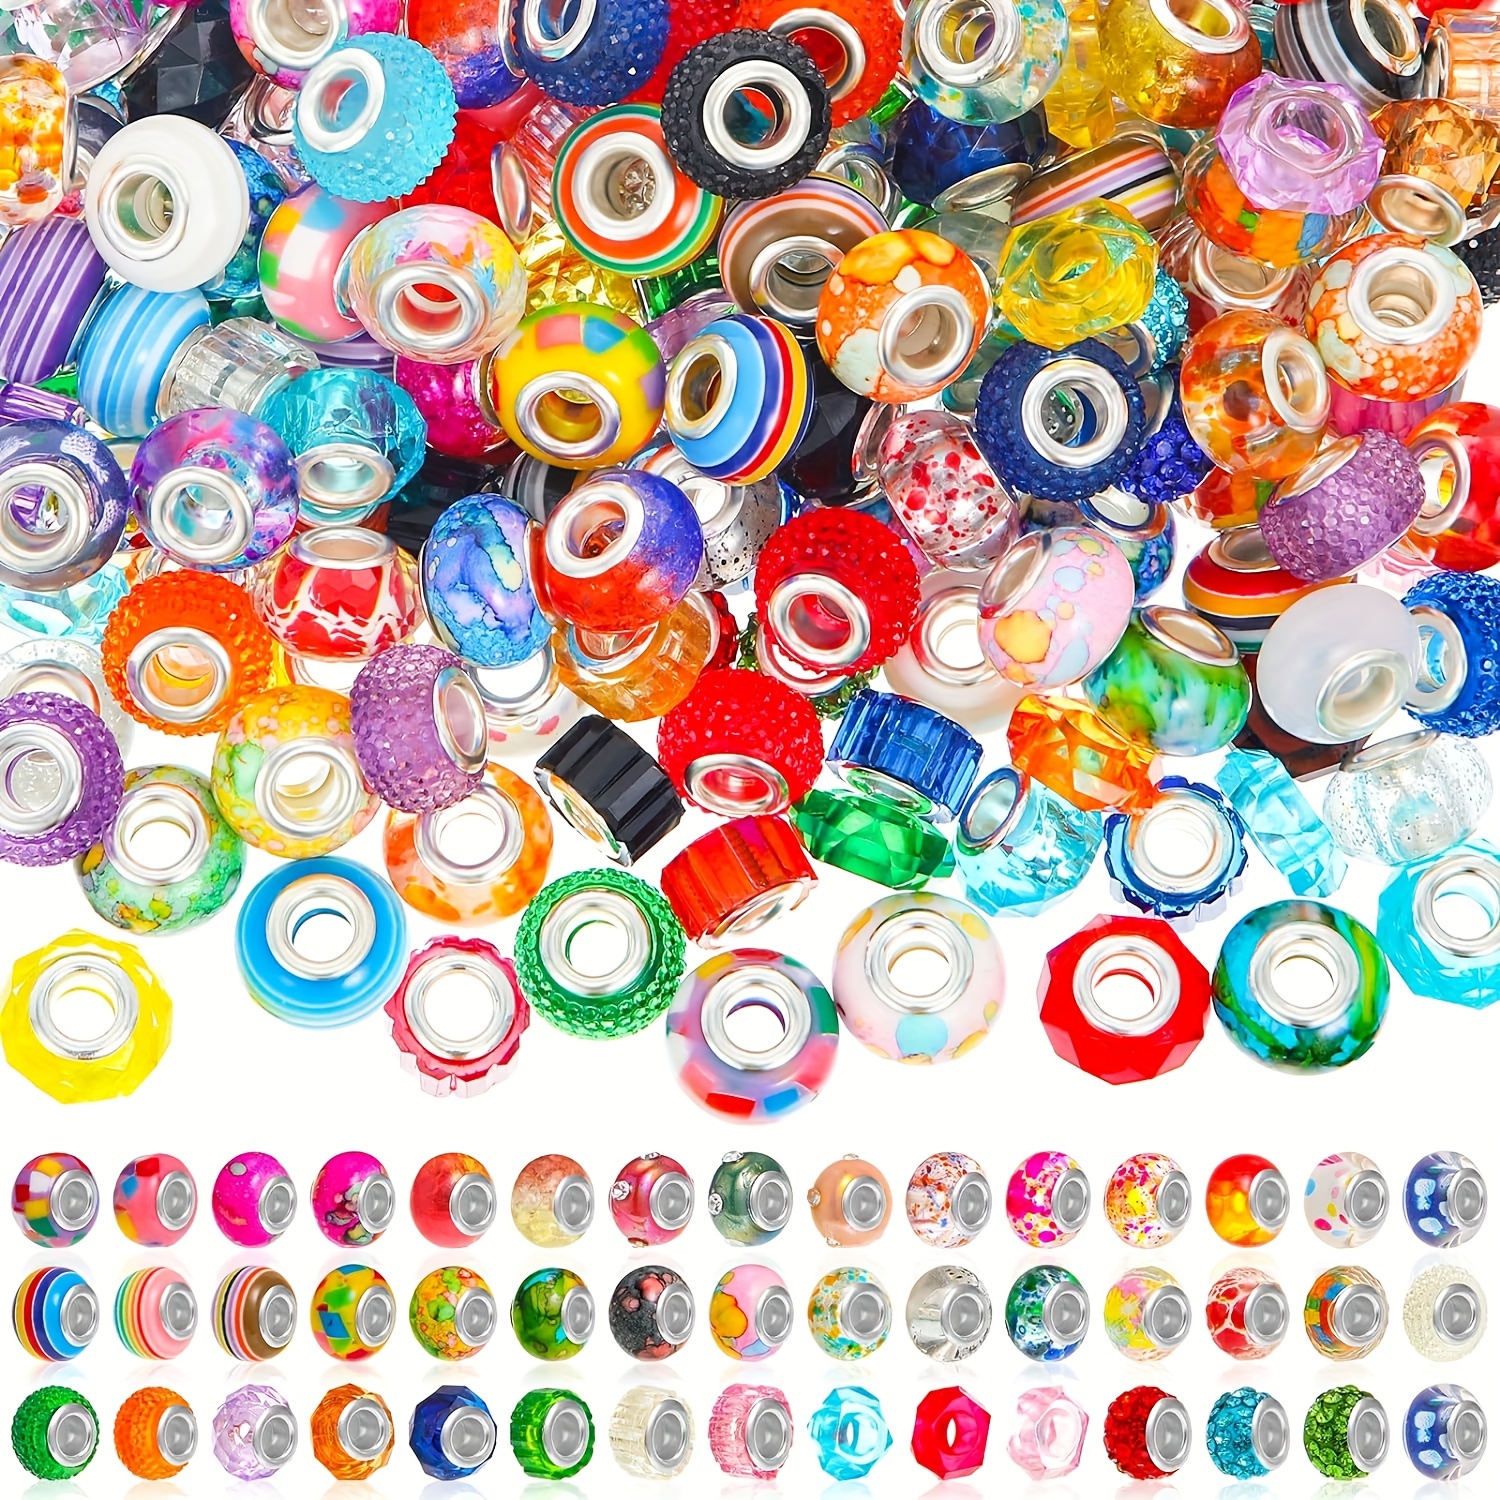 

100pcs Mixed Colorful Large Hole Glass Faceted Lampwork Loose Spacer Beads Silvery Plated Cores For Diy Bracelet Necklace Crafts Jewelry Making Supplies